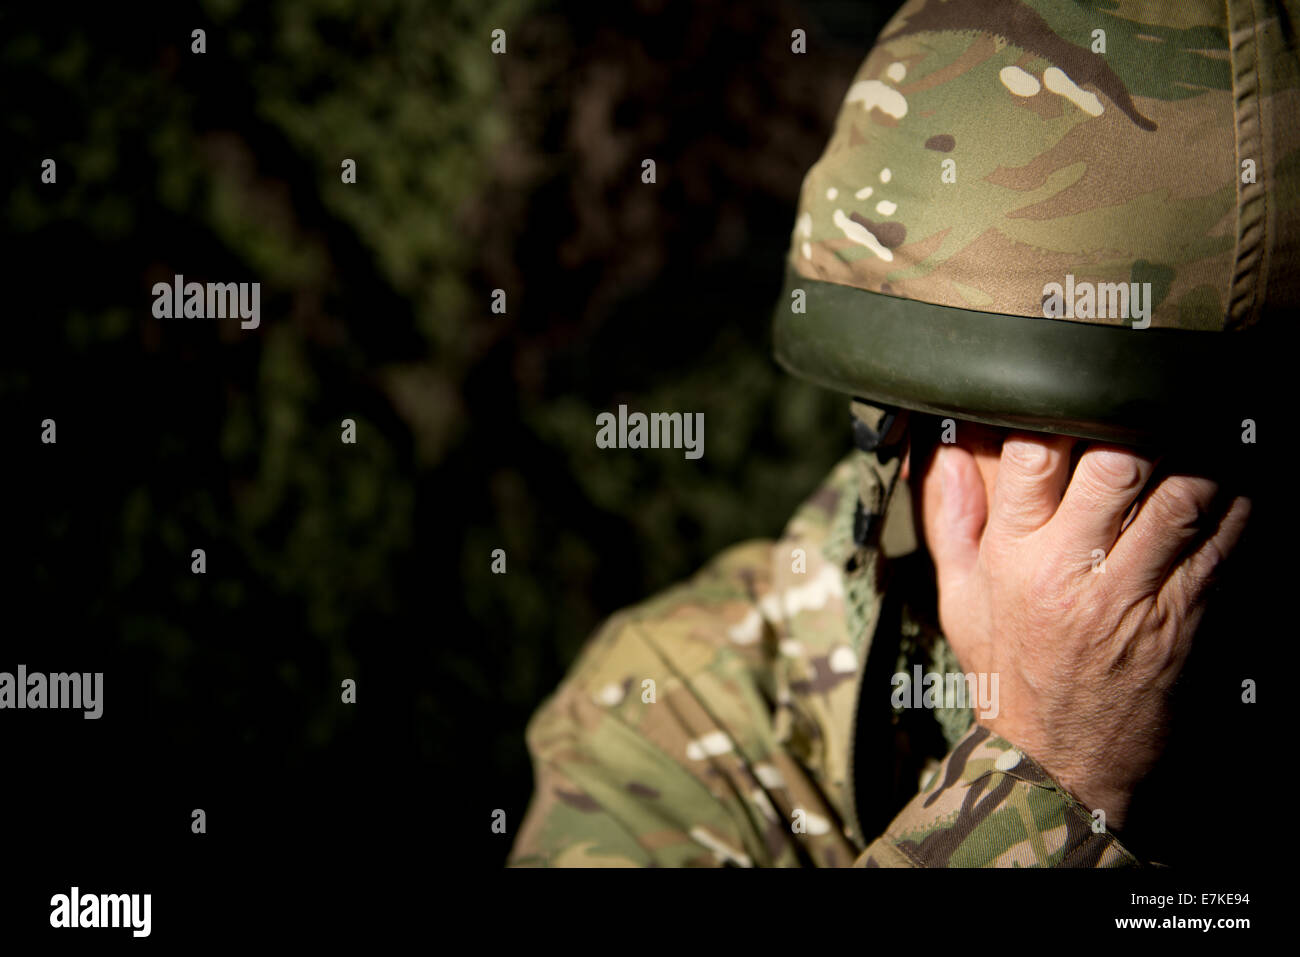 British soldier with his hands covering his face. Lit using a single spot light. Stock Photo